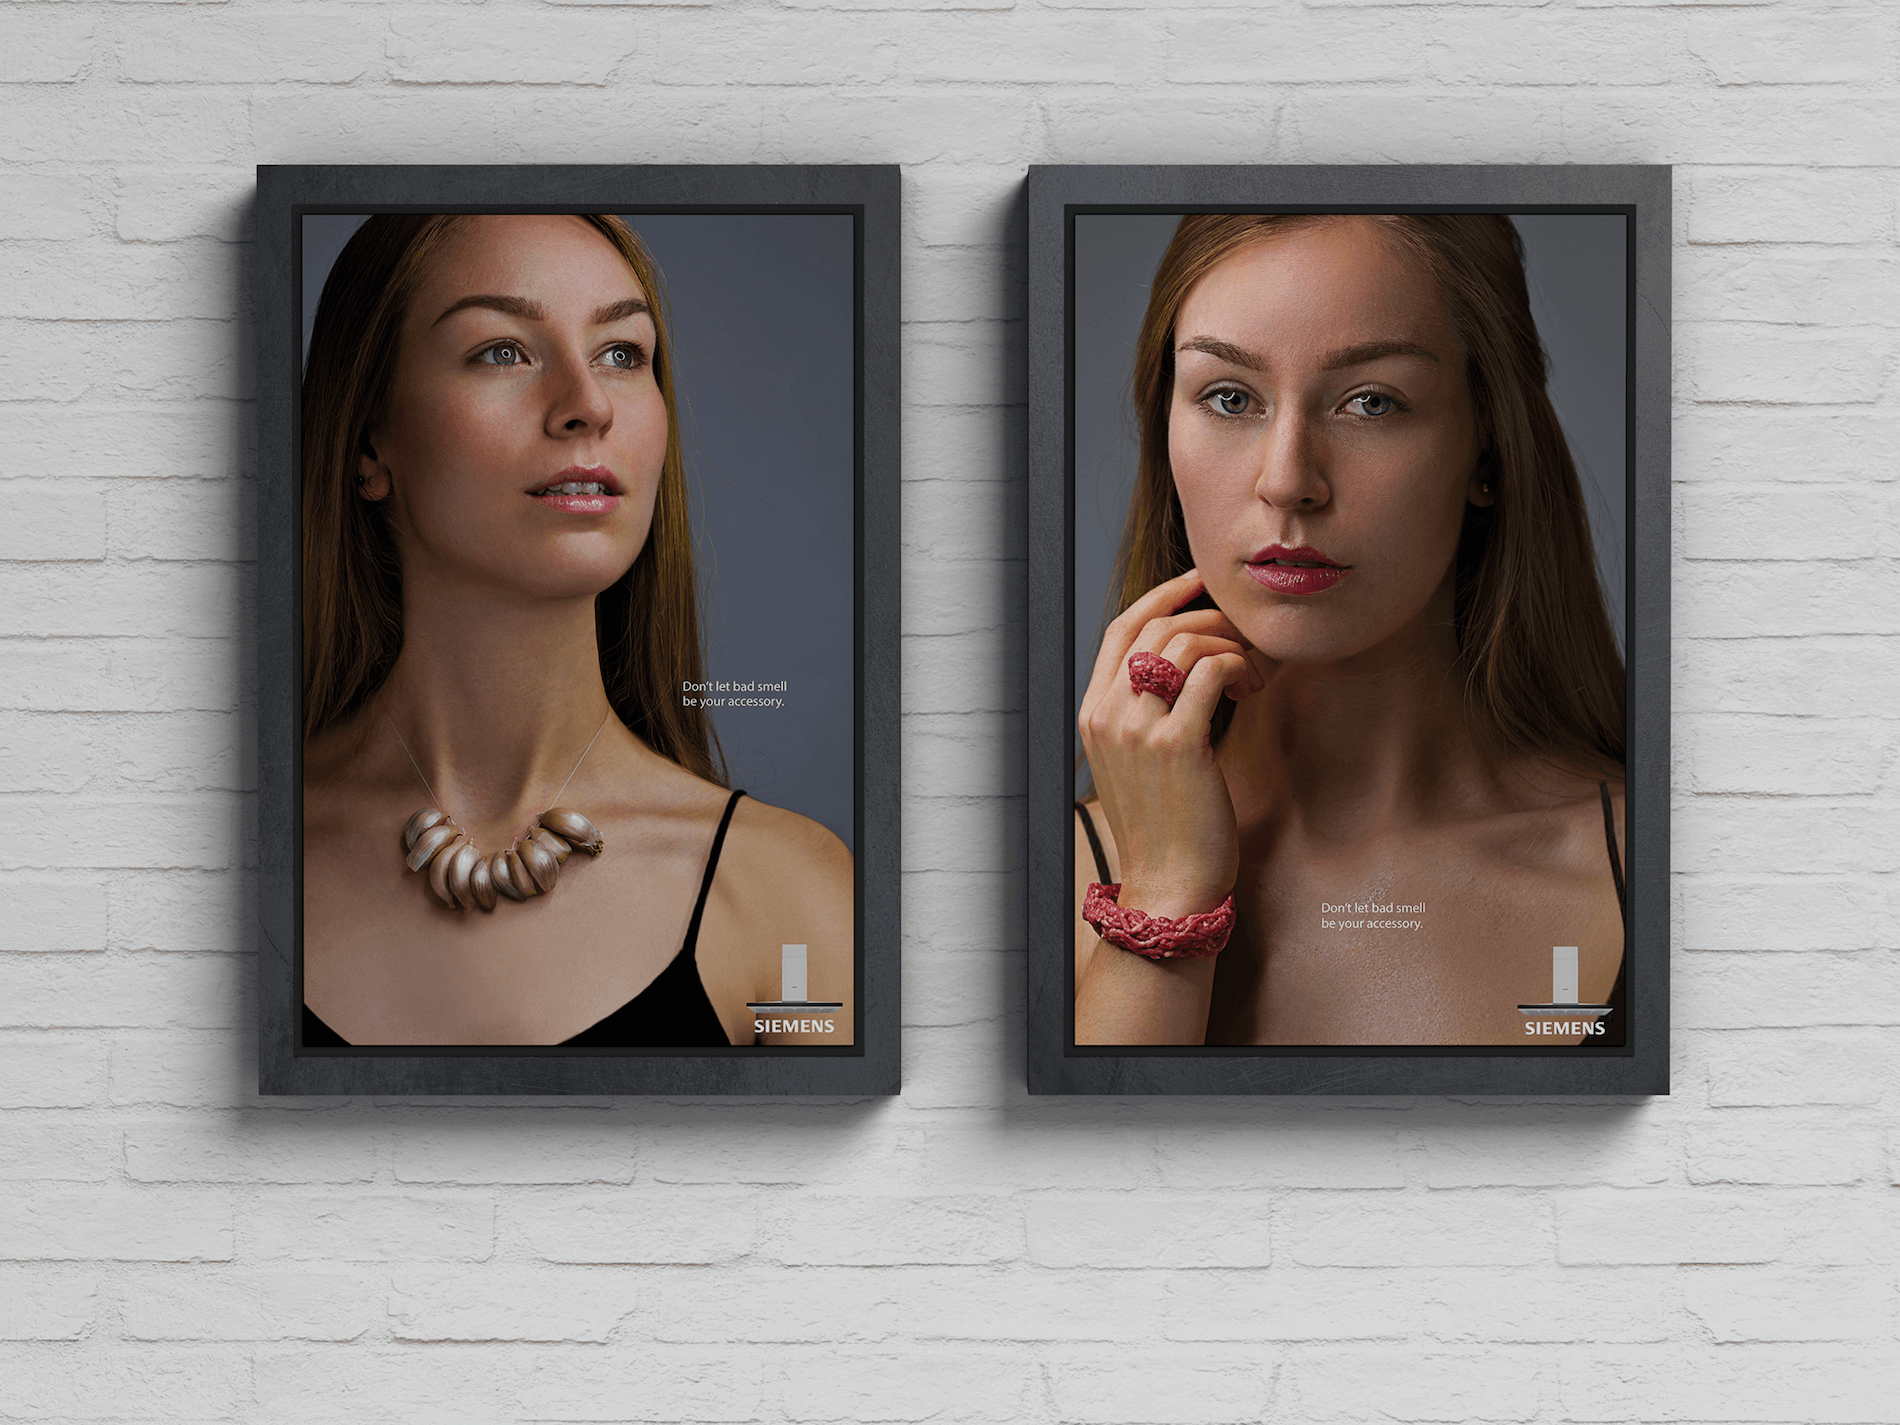 Girl wearing neacklace ring and bracelet of coral and pearls which are actually raw meat and garlic cloves advertising campaign photography for Siemens Accessory Exhaust Hoods mockup busstop bus advertising campaign print poster